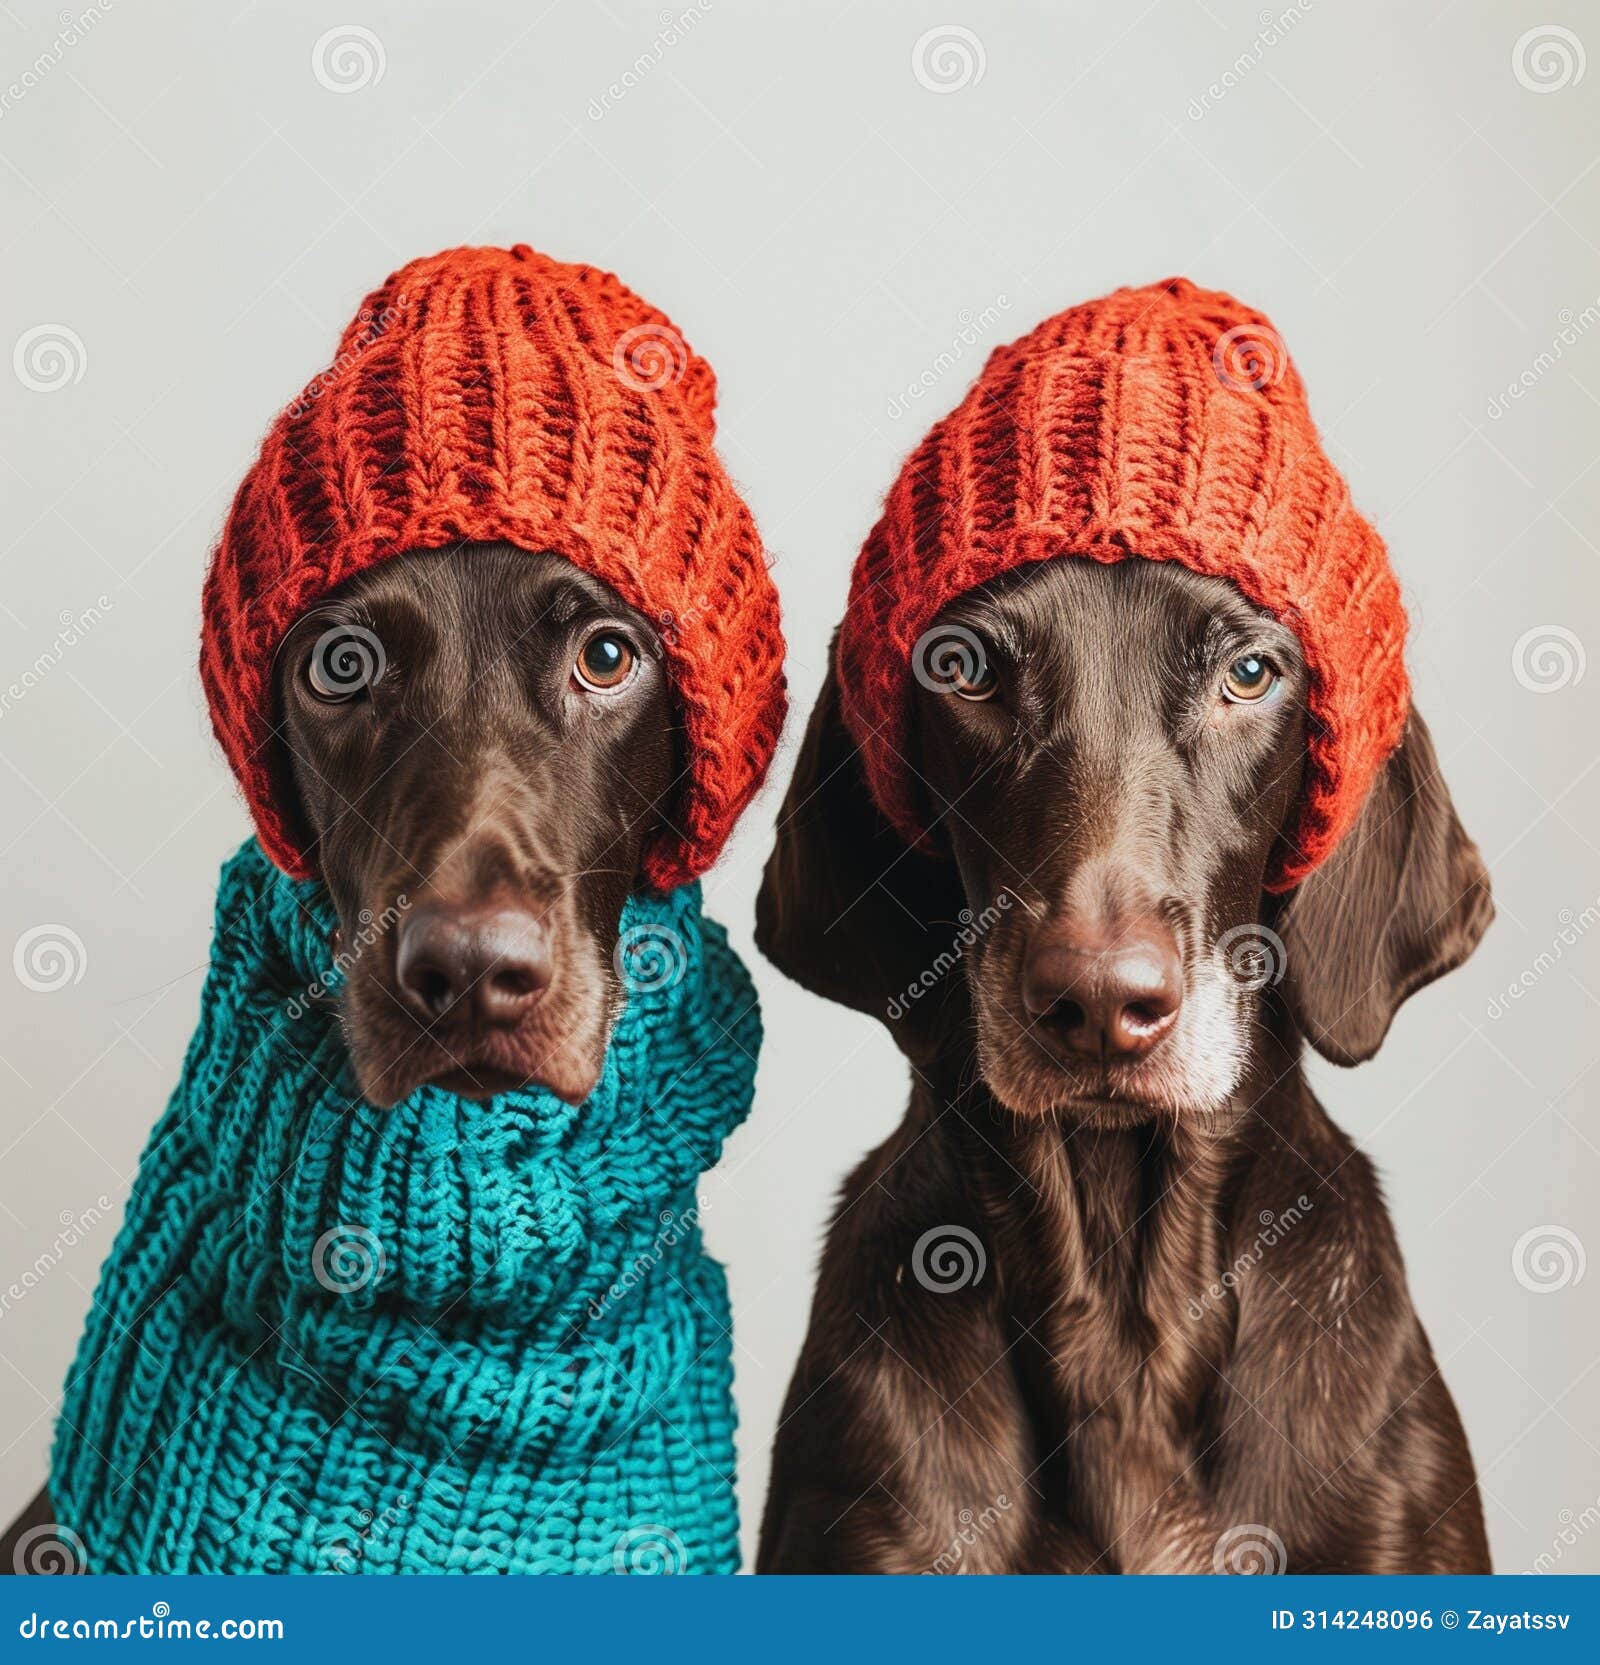 two german shorthaired pointer dogs wearing balaclavas, in red and teal knitted wool, minimalist photography with a